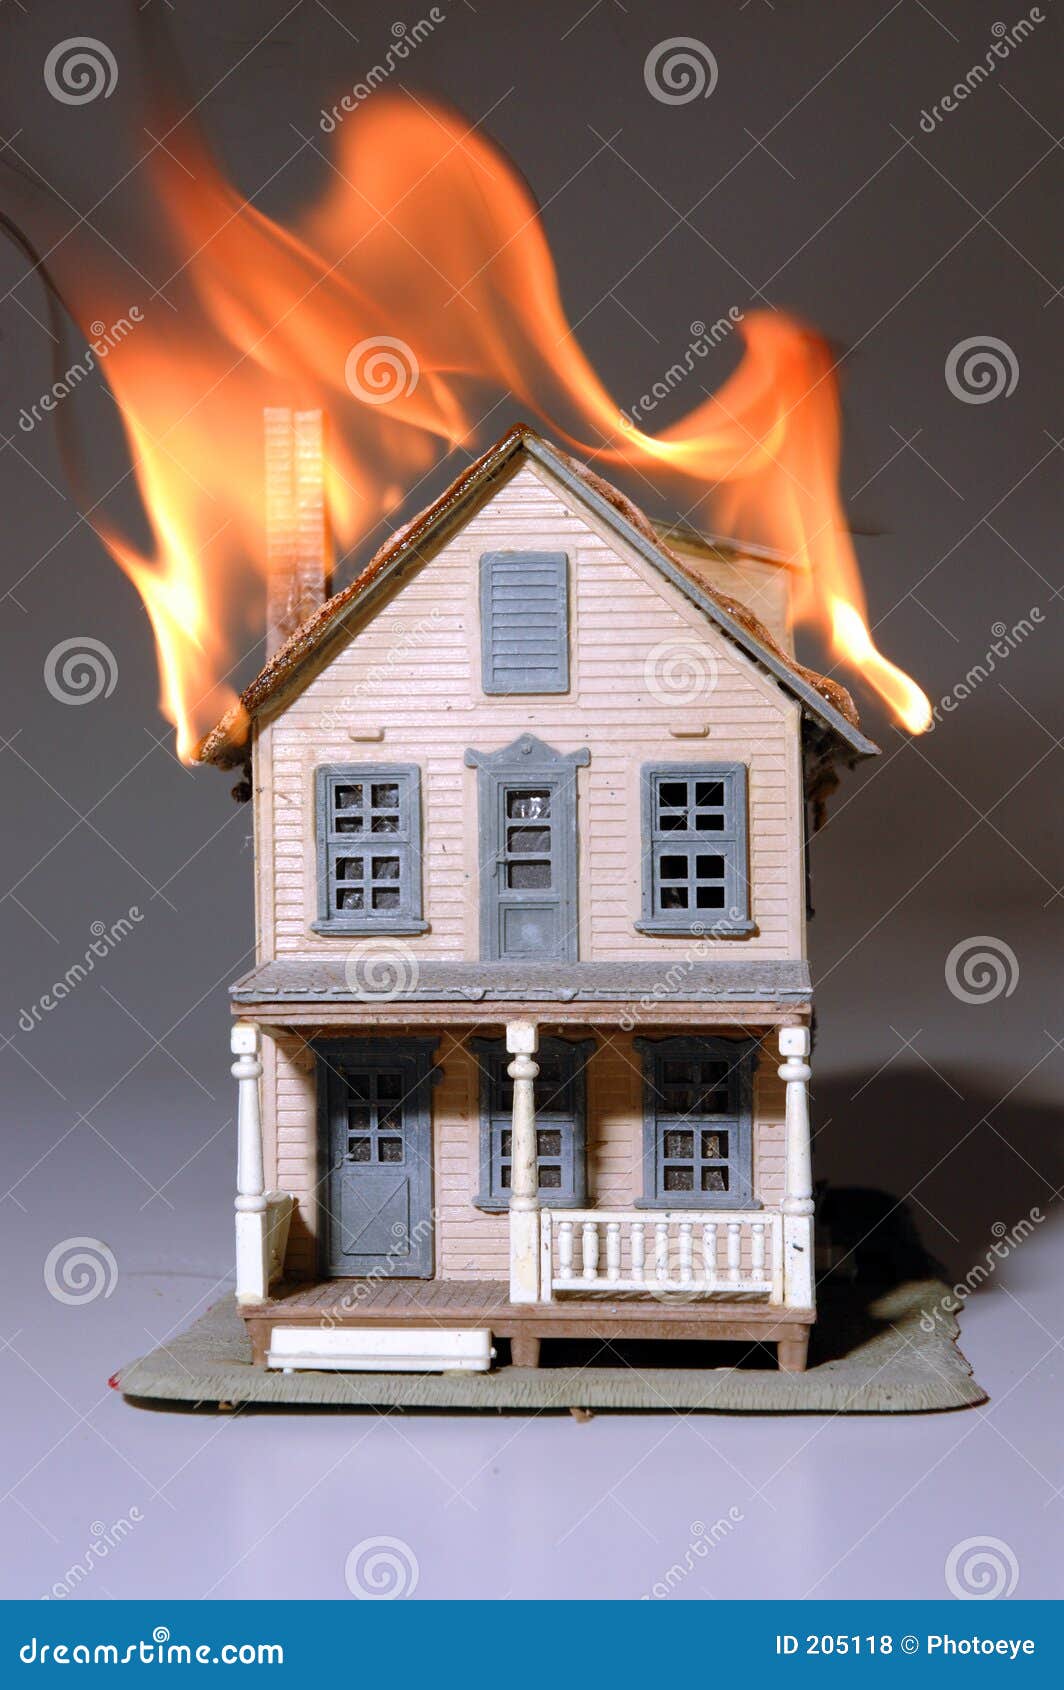 fire house clipart - photo #45